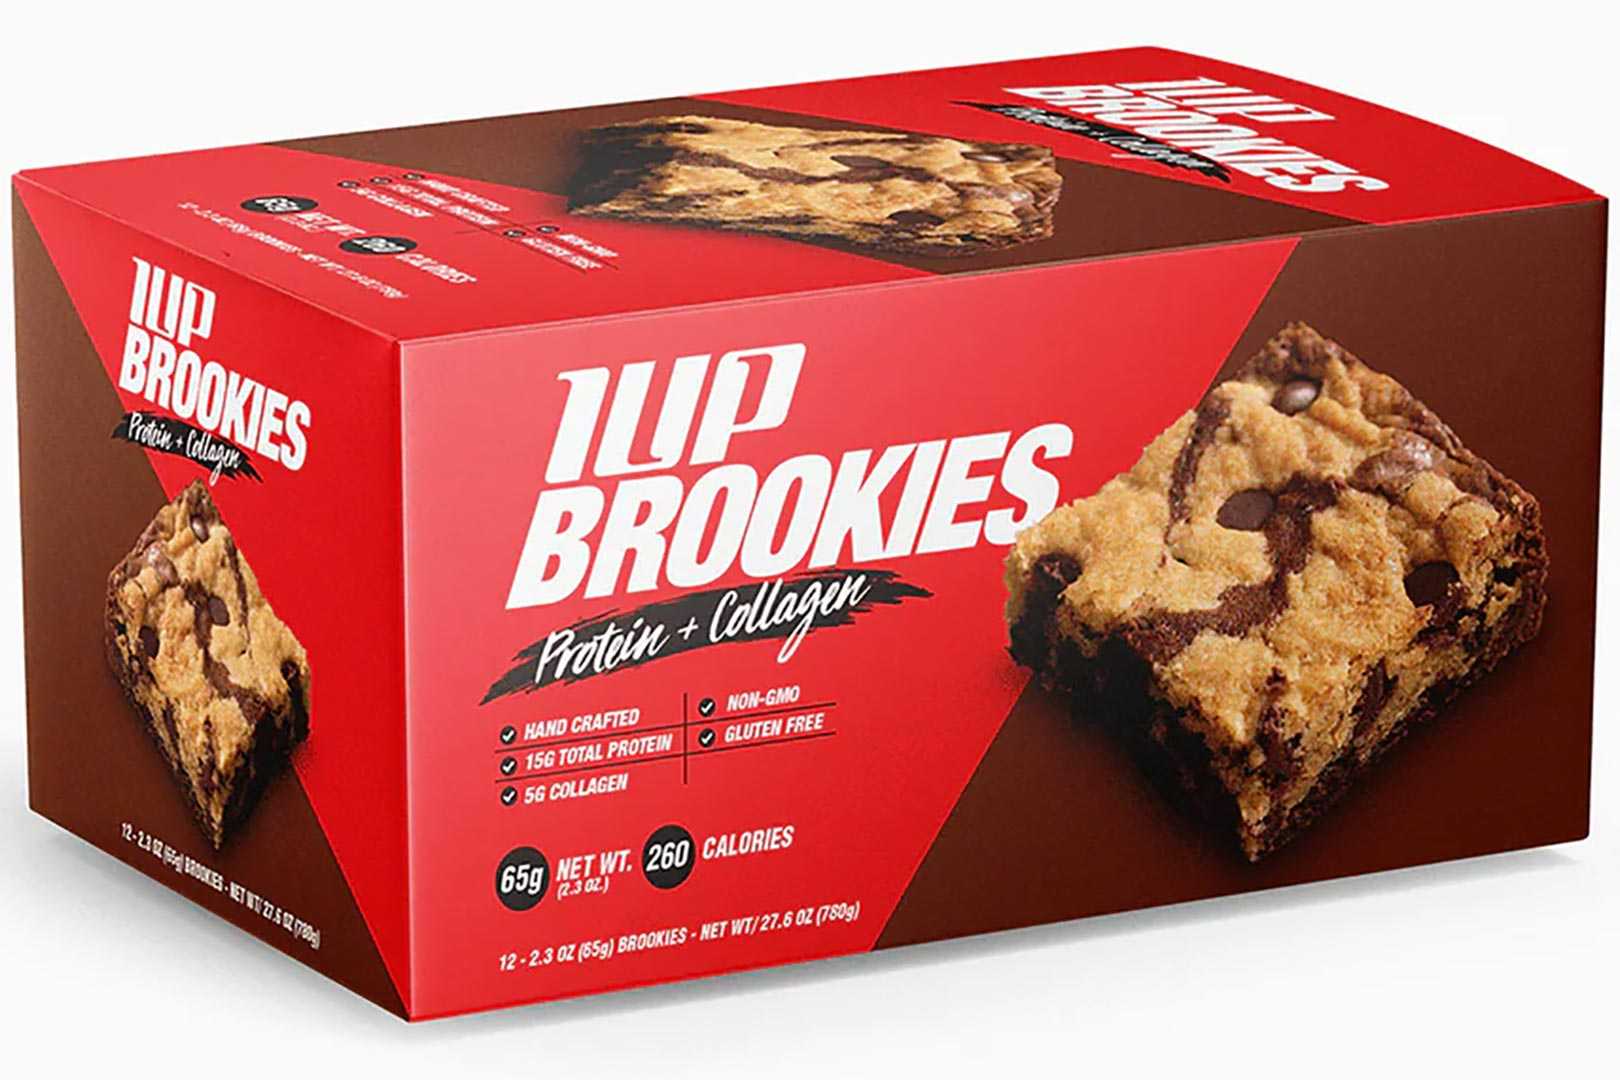 1up Nutrition 1up Brookie 1